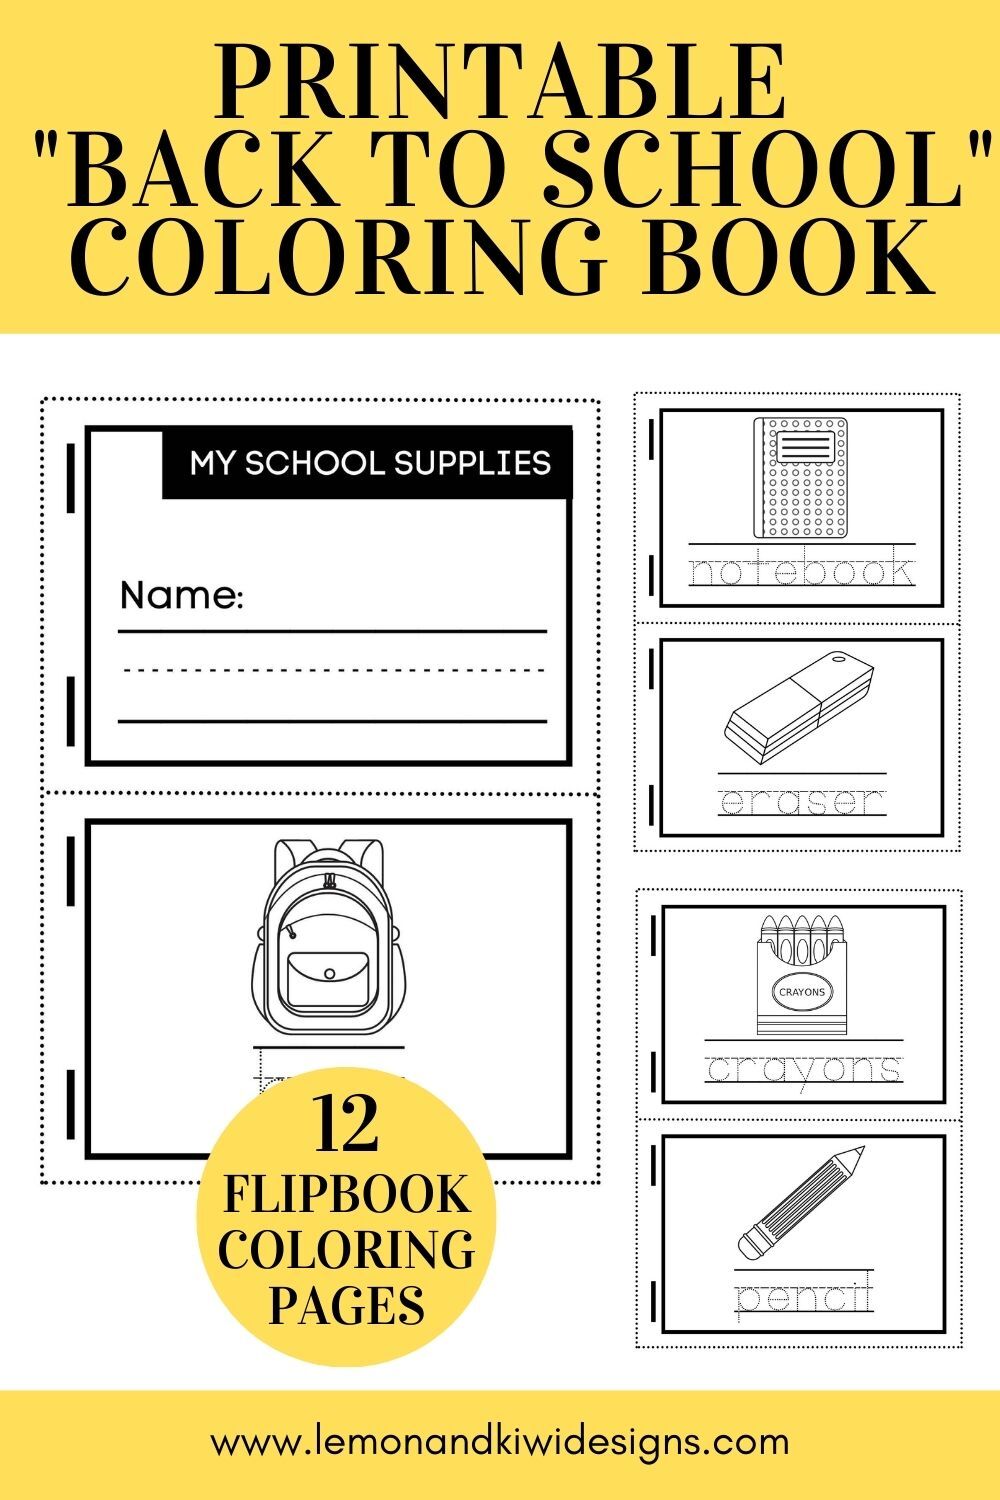 Printable Back to School Coloring Book